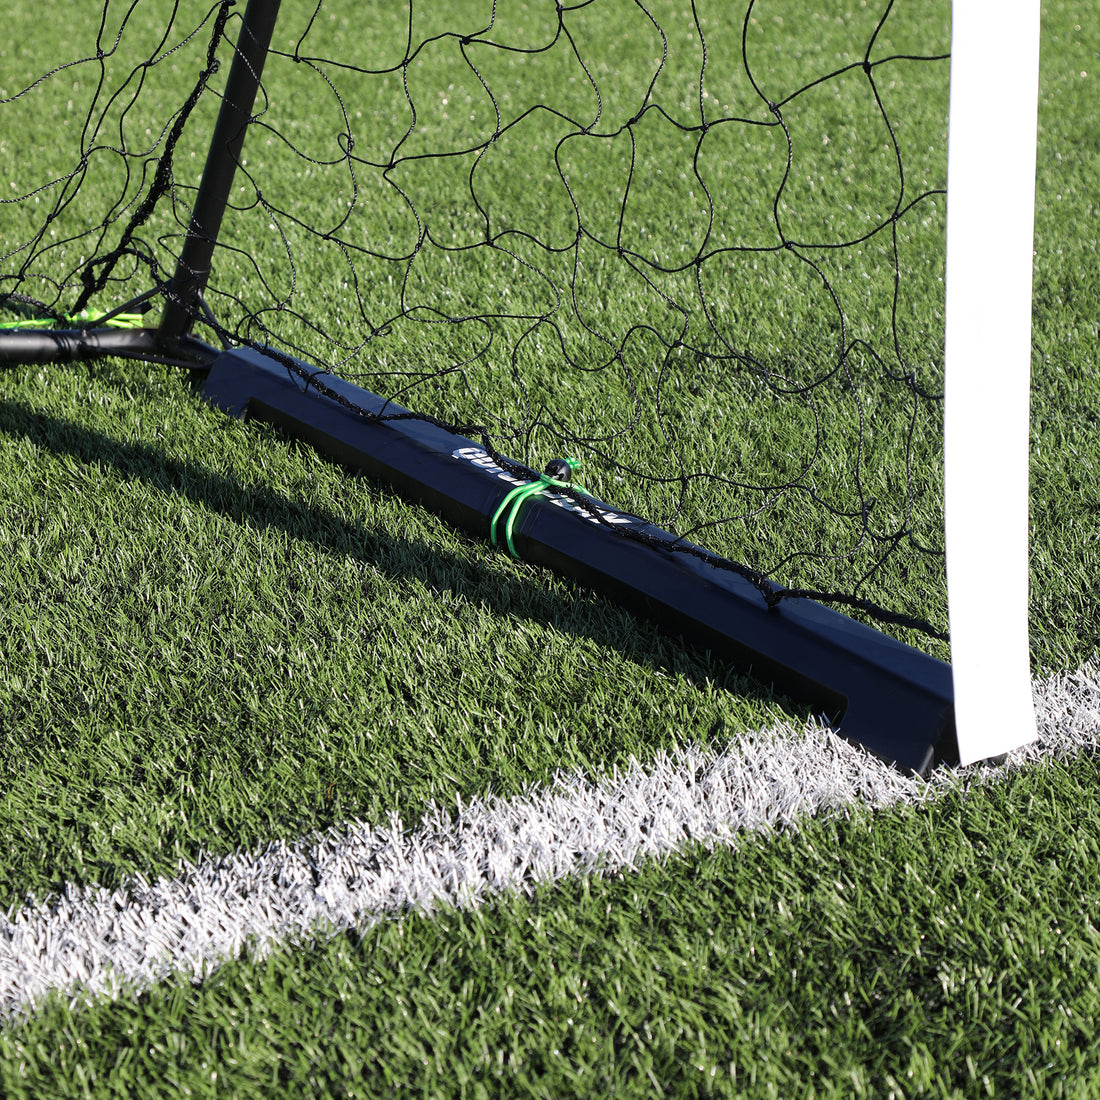 KICKSTER Base Weight (set of 2) Large Goals Sizes: Futsal > 18.5x6.5' - Works with goals purchased after Apr '23